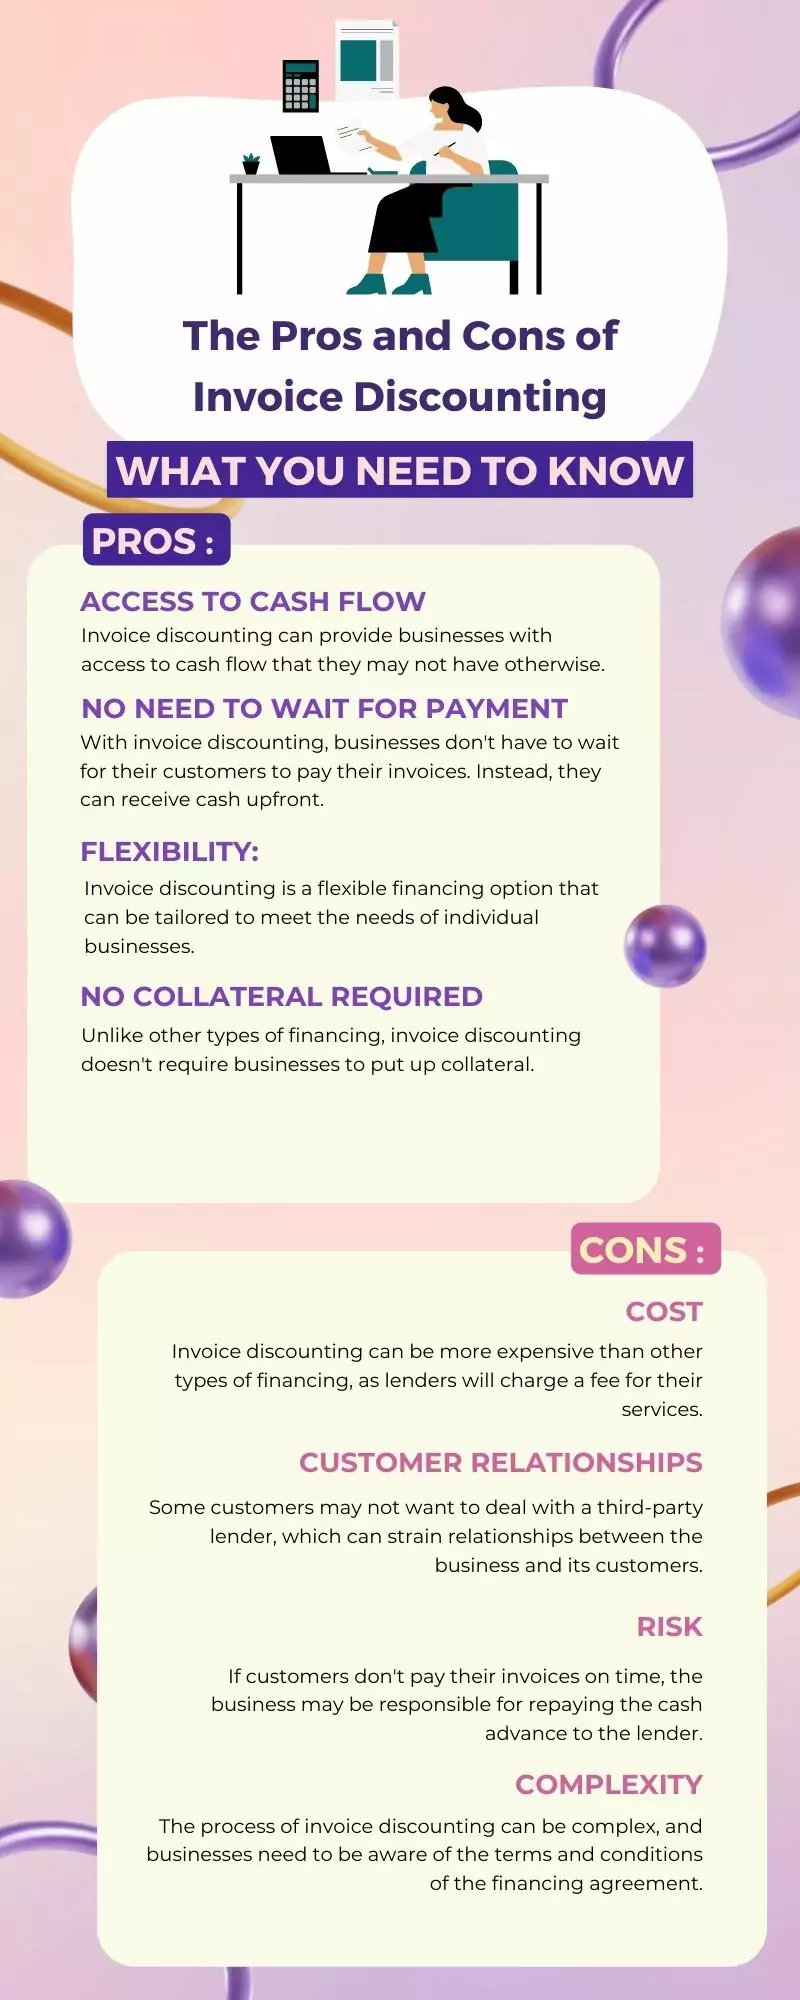 Pros and Cons of Invoice Discounting